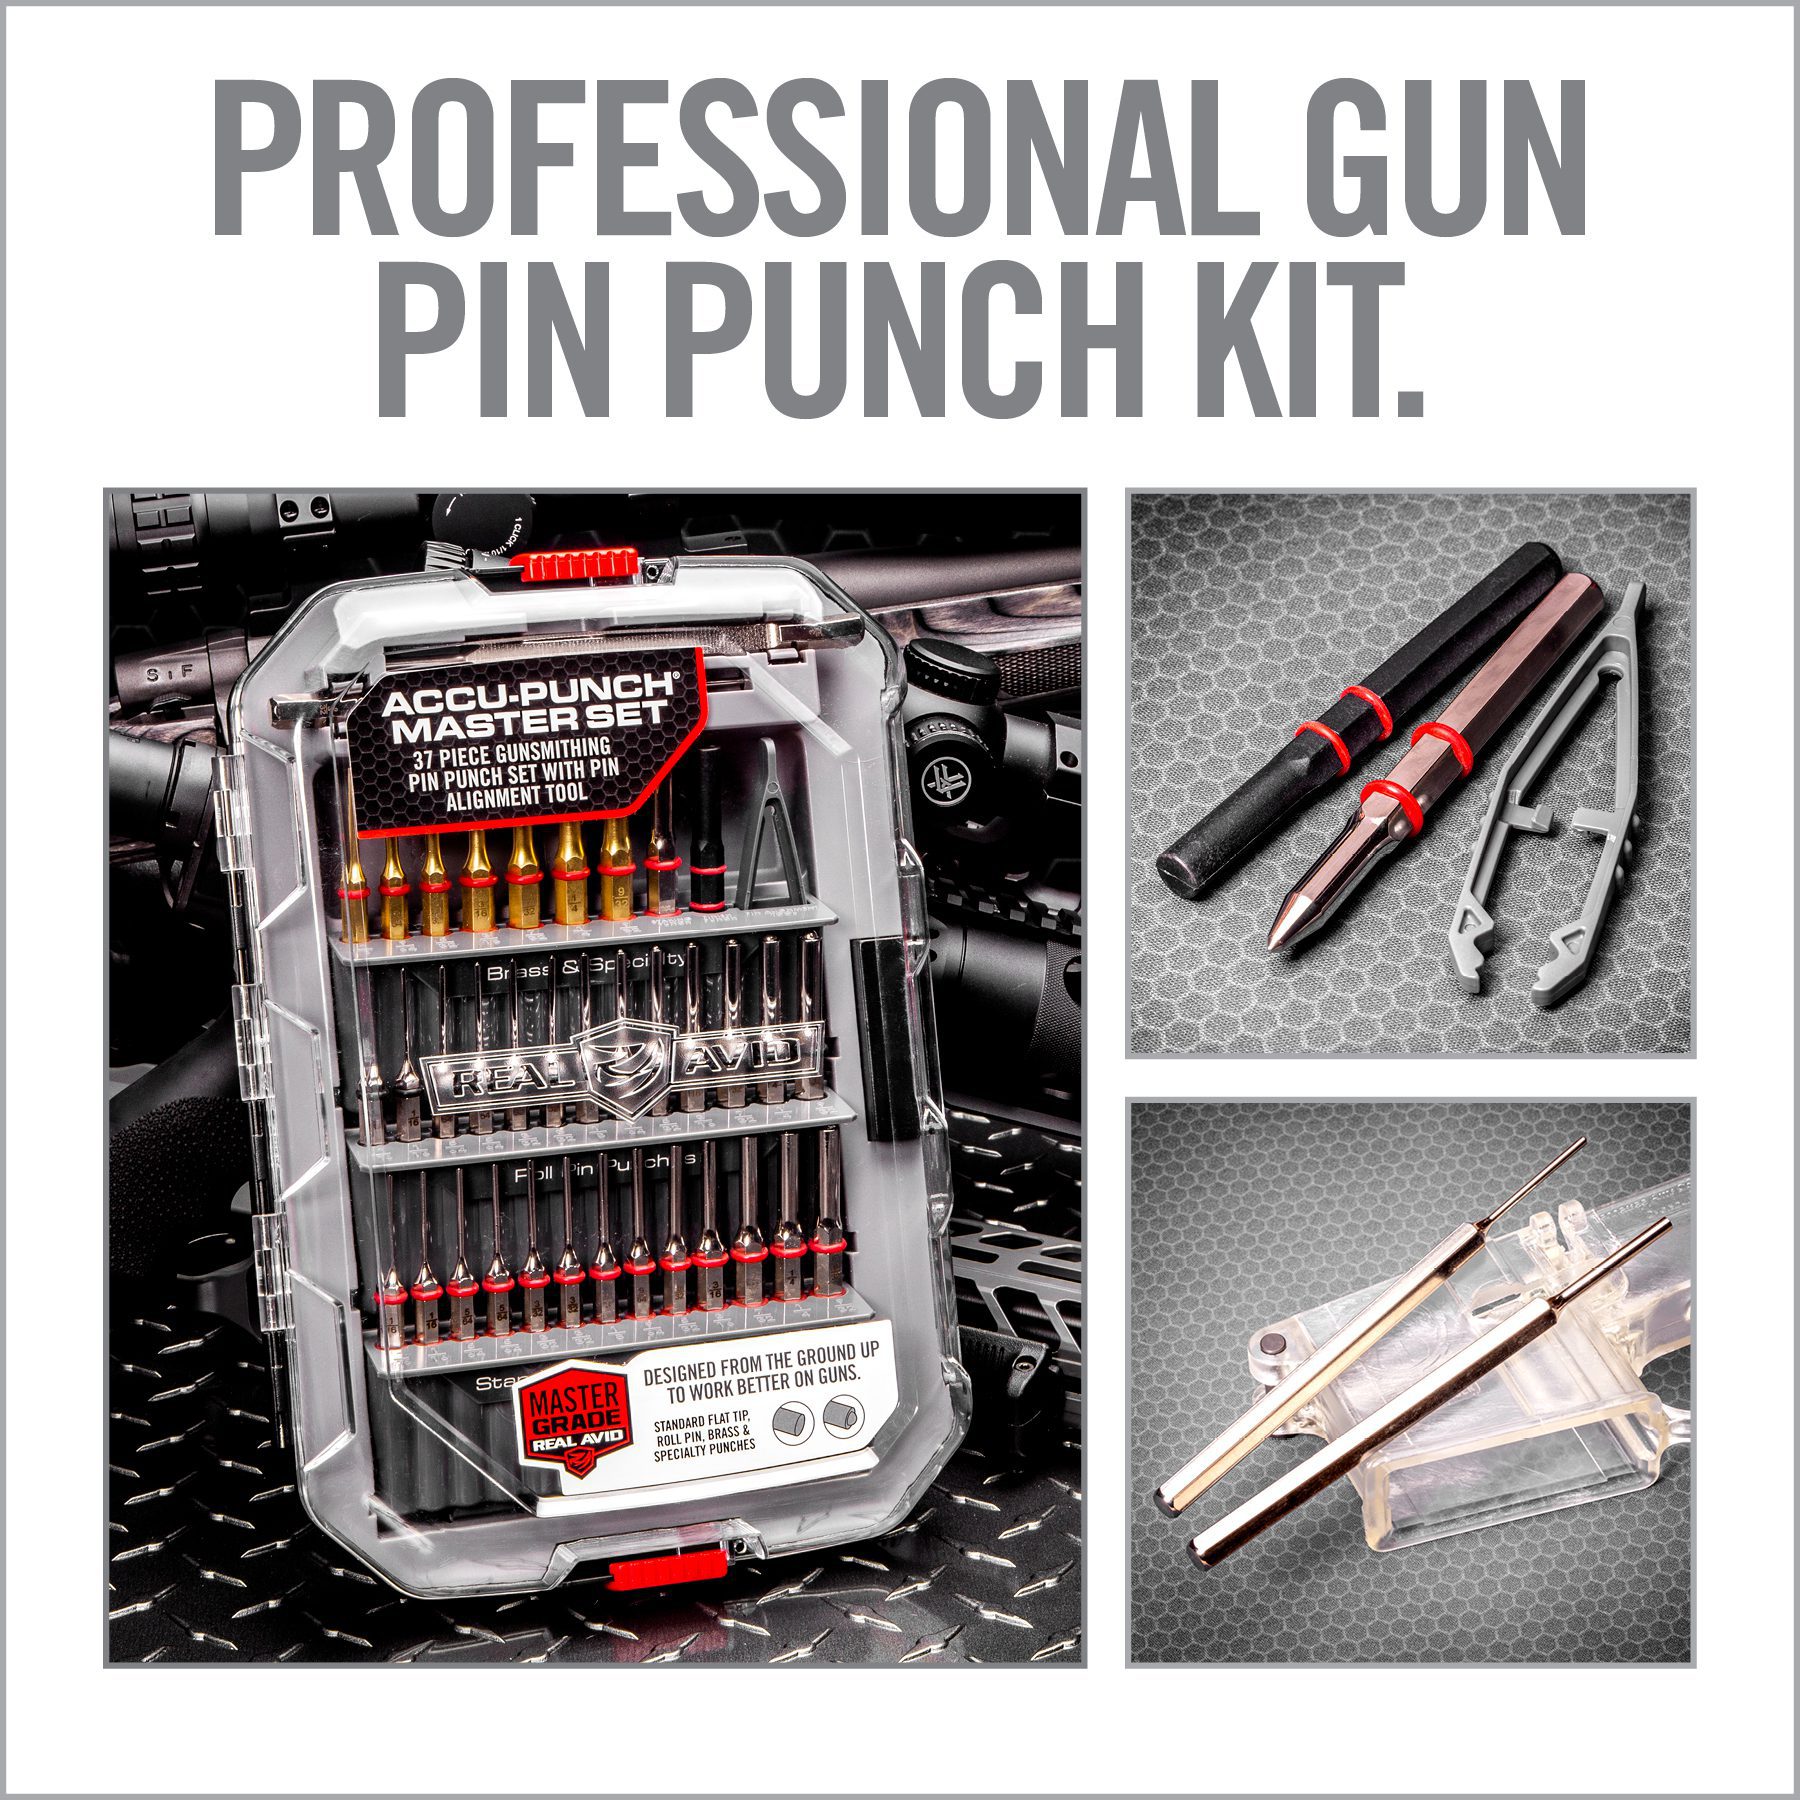 the professional gun pin punch kit is open